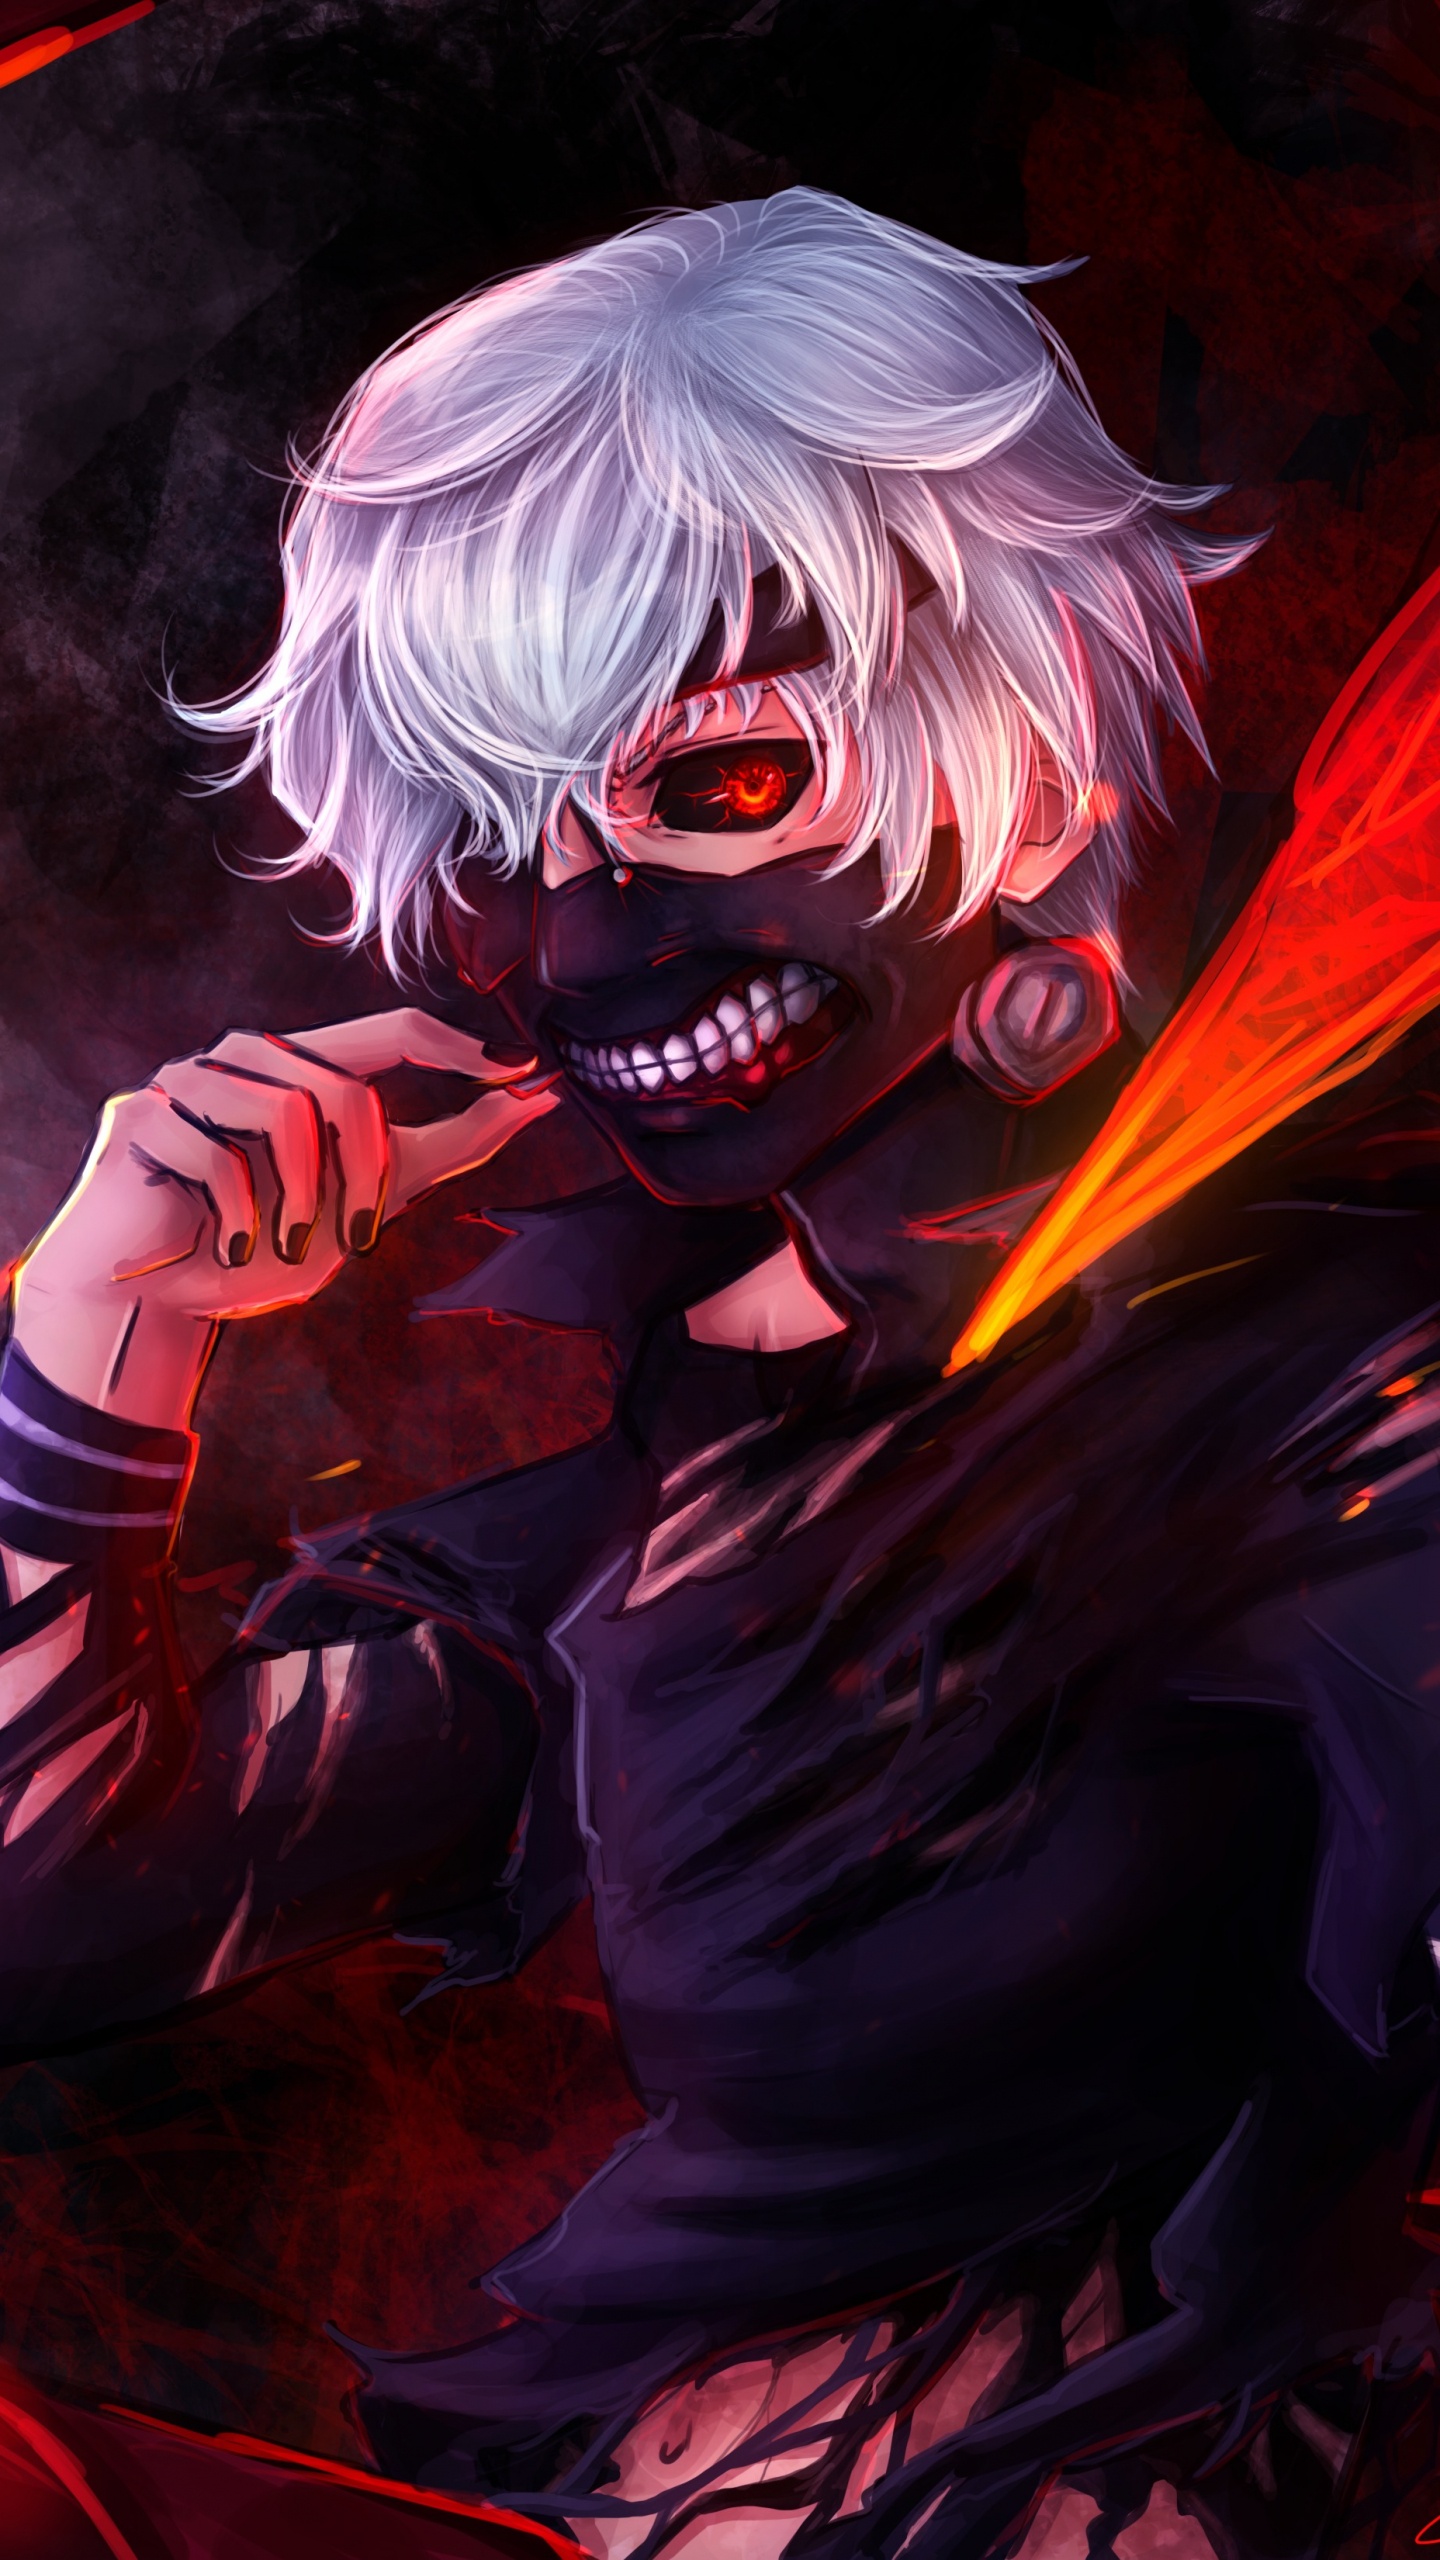 Man in Black and Red Suit Anime Character. Wallpaper in 1440x2560 Resolution